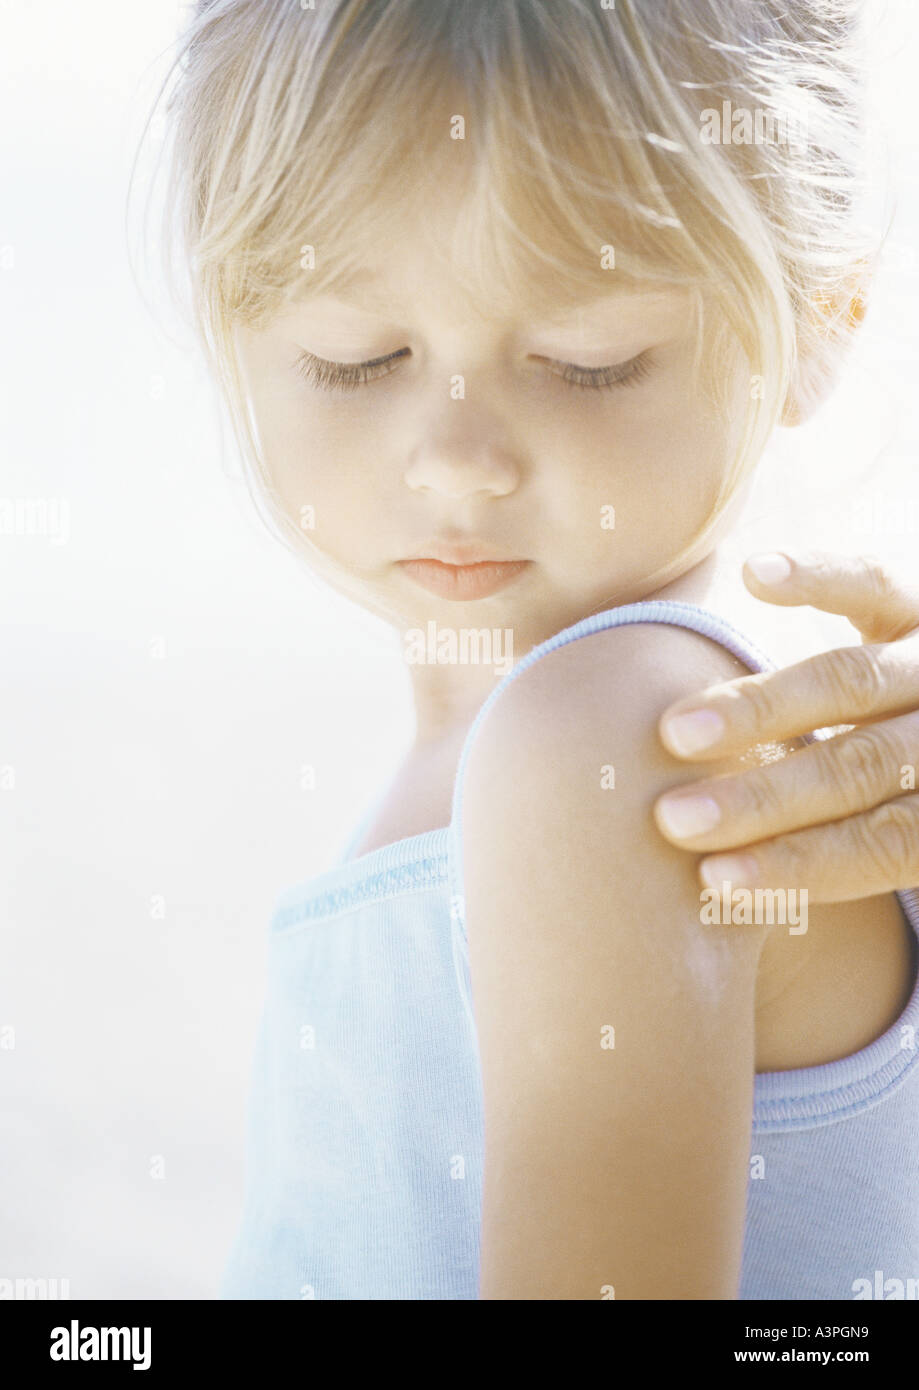 Girl having sunscreen applied to shoulder Stock Photo